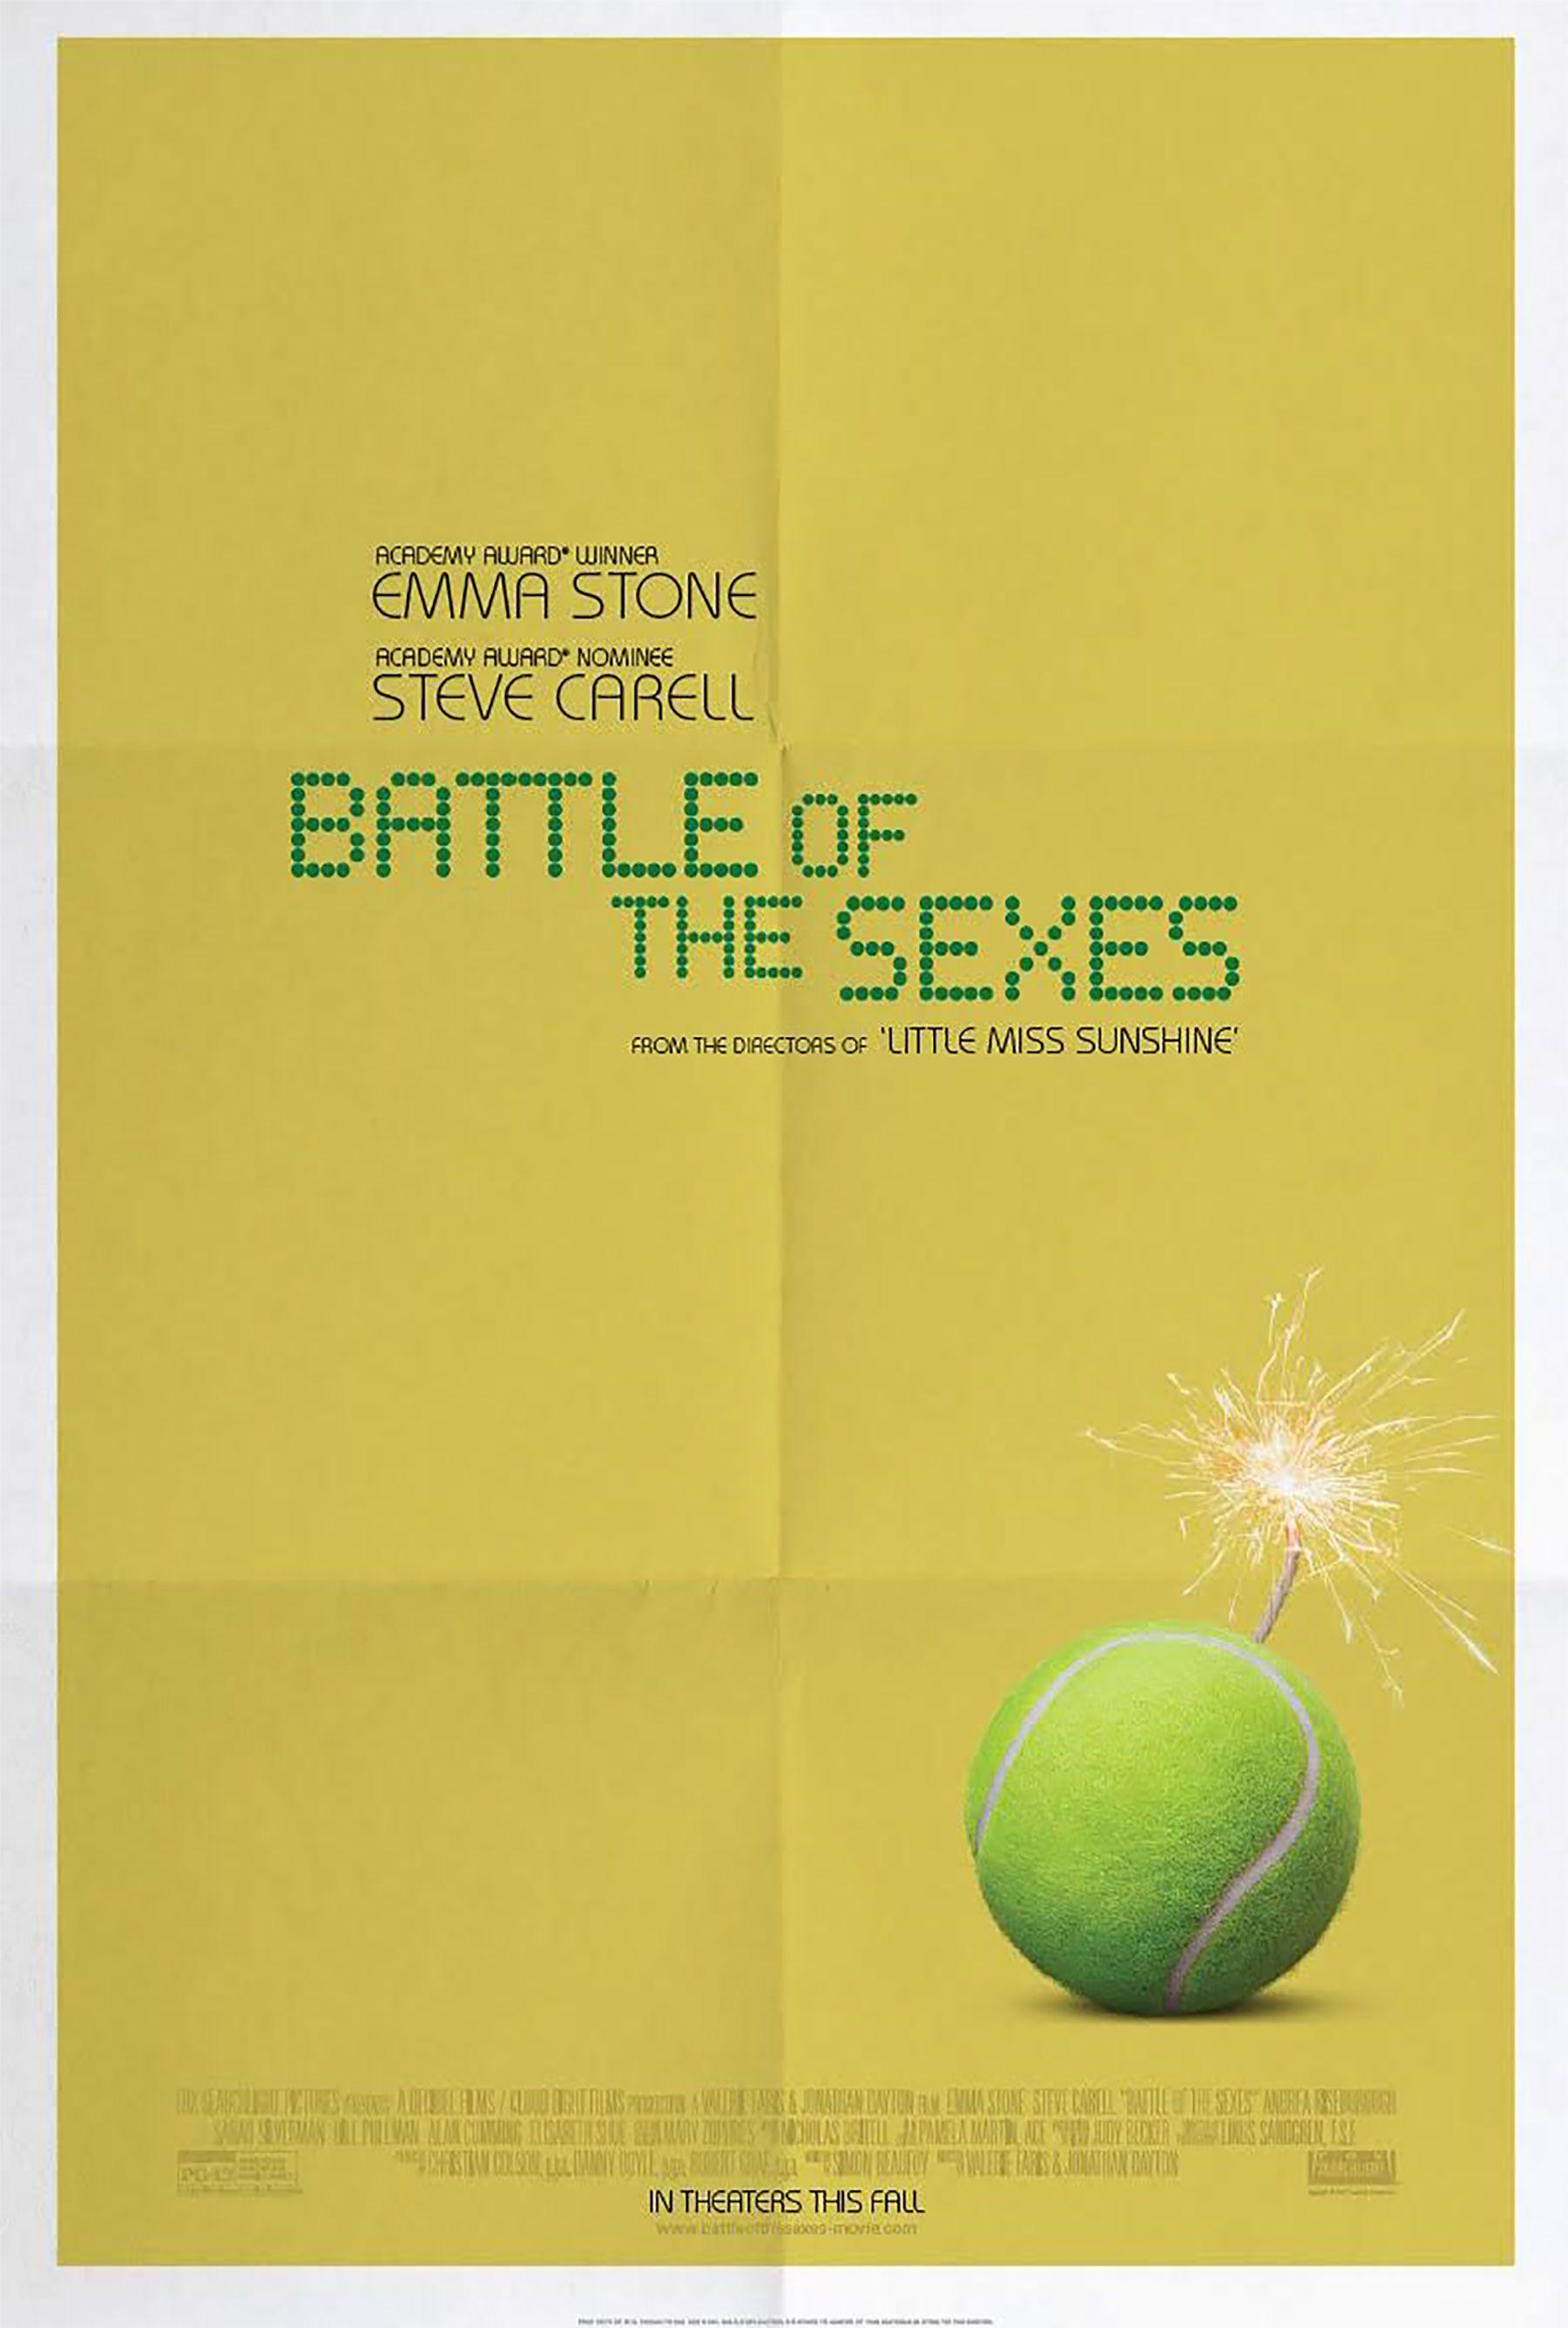 All Movie Posters and Prints for Battle of the Sexes